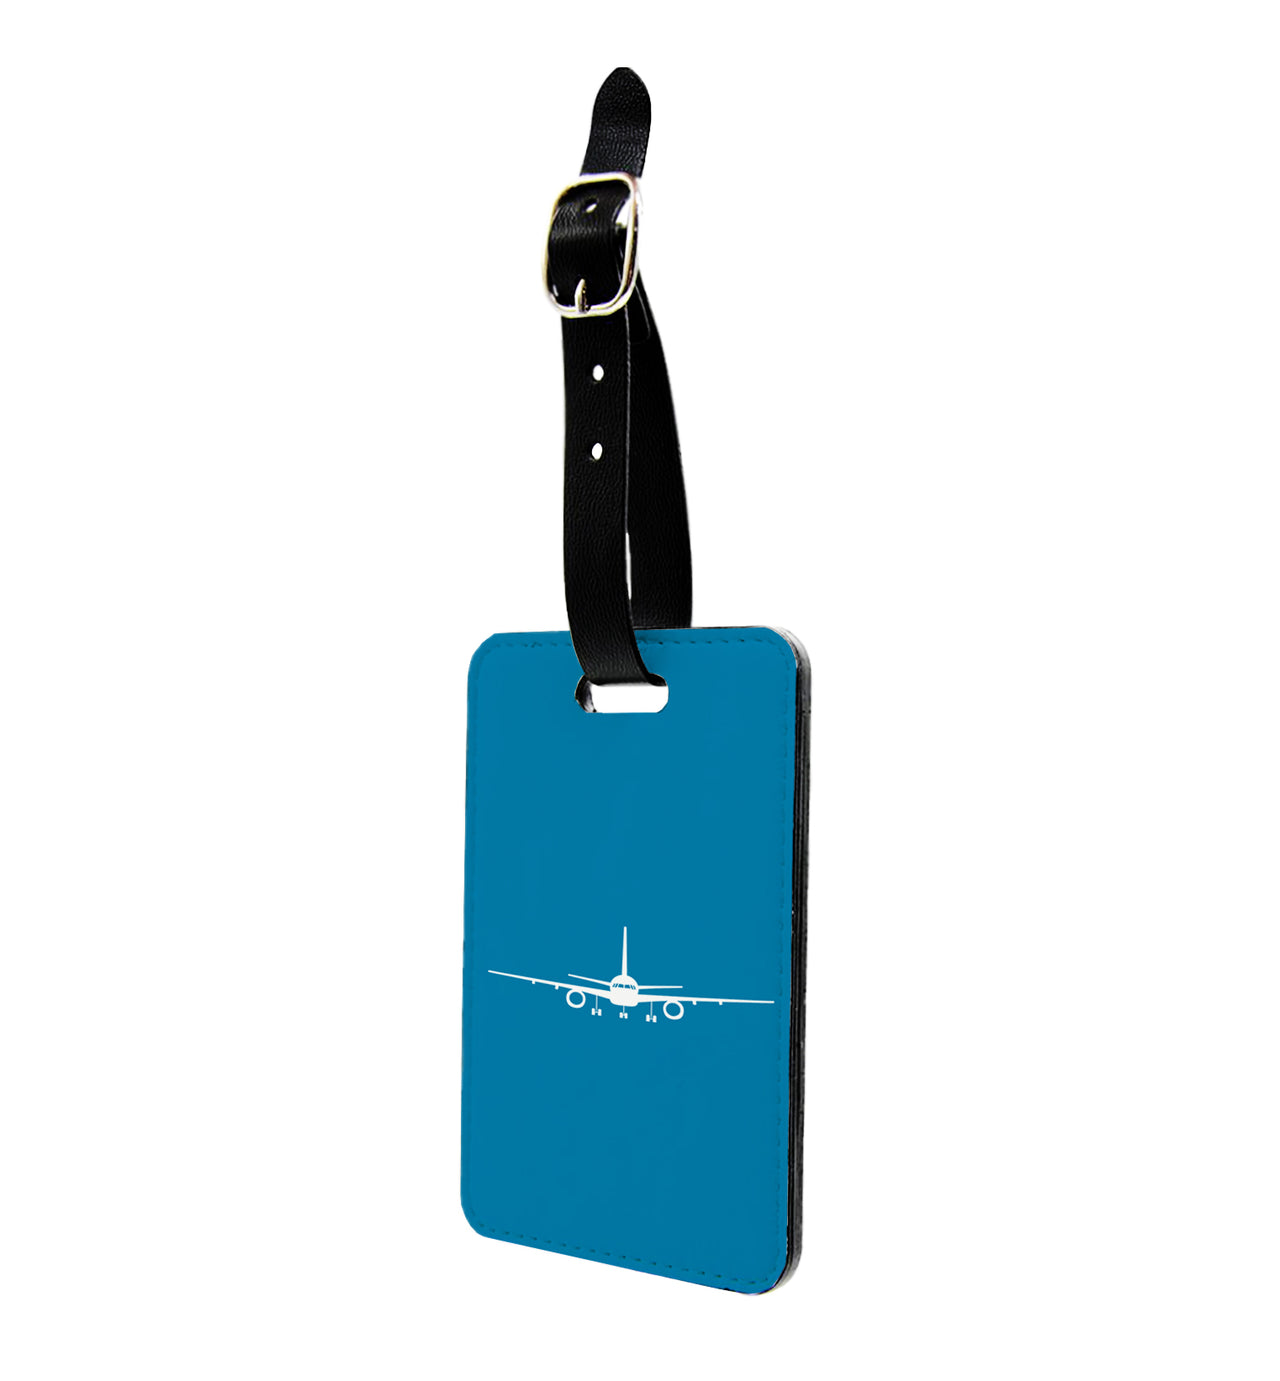 Boeing 757 Silhouette Designed Luggage Tag